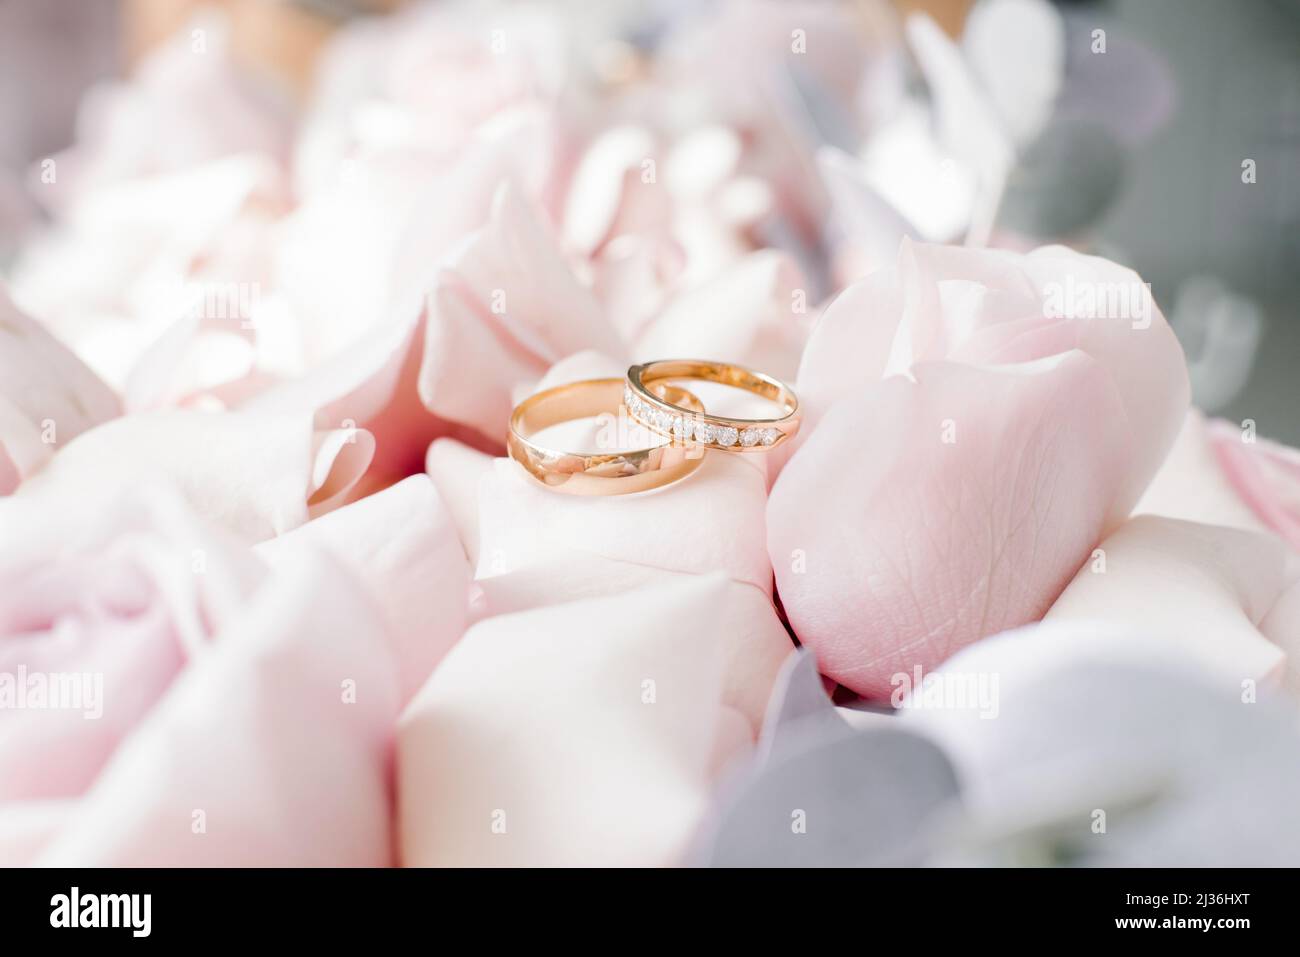 Gold wedding rings lie on delicate pink roses close-up Stock Photo